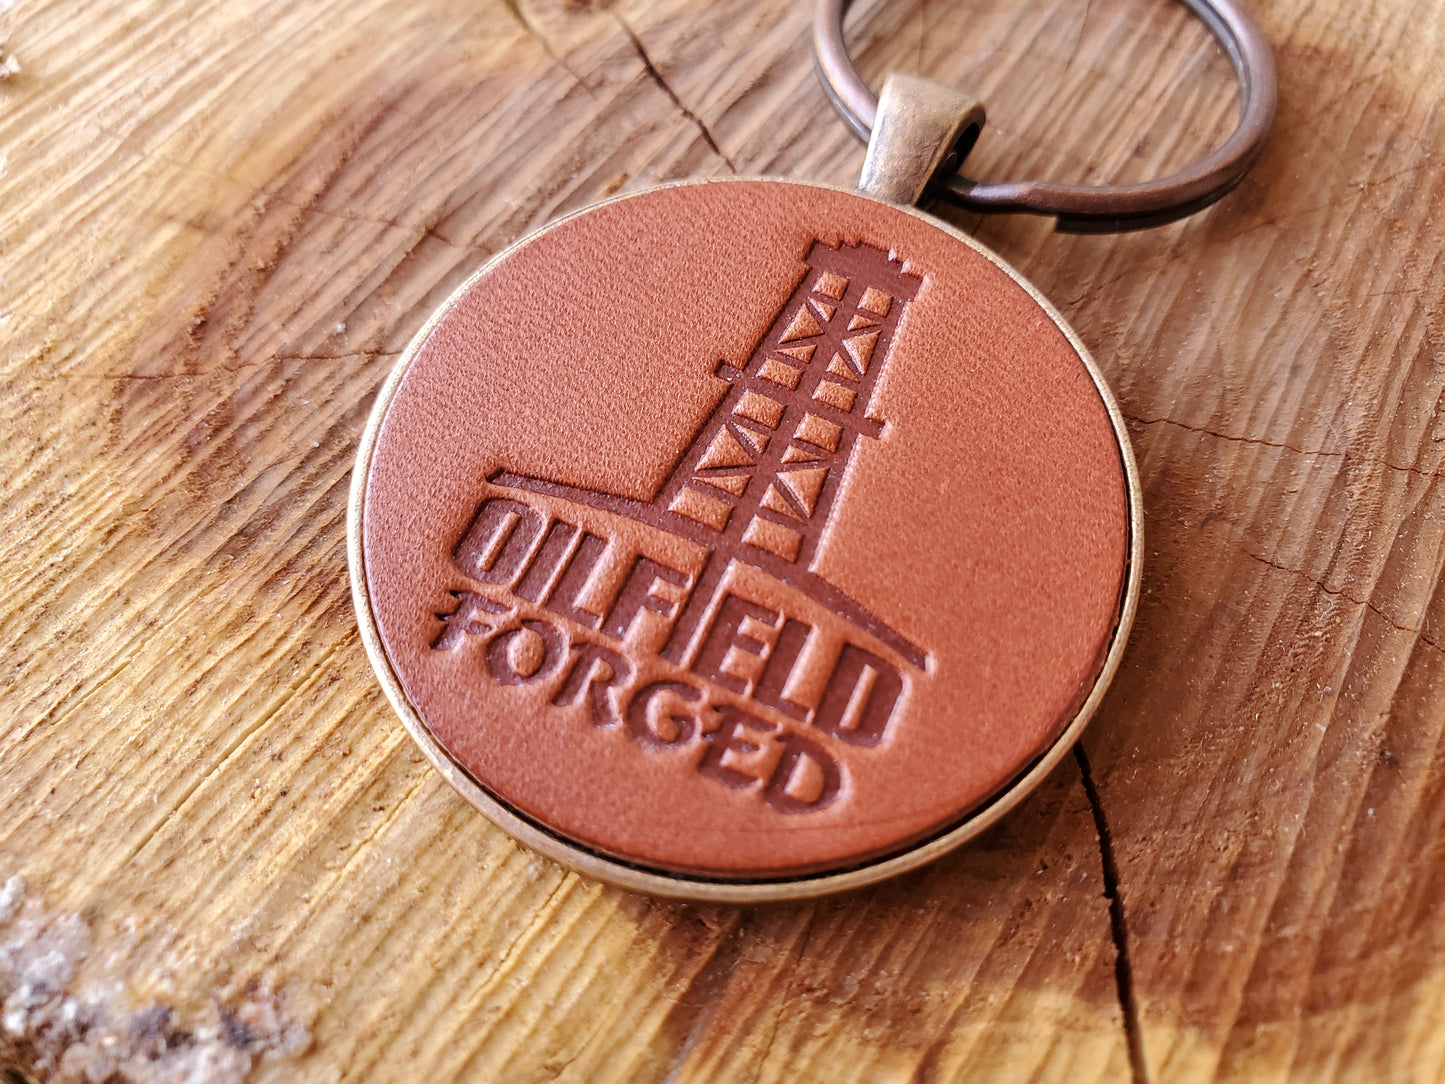 Oilfield Forged Leather Keychain - Lazy 3 Leather Company